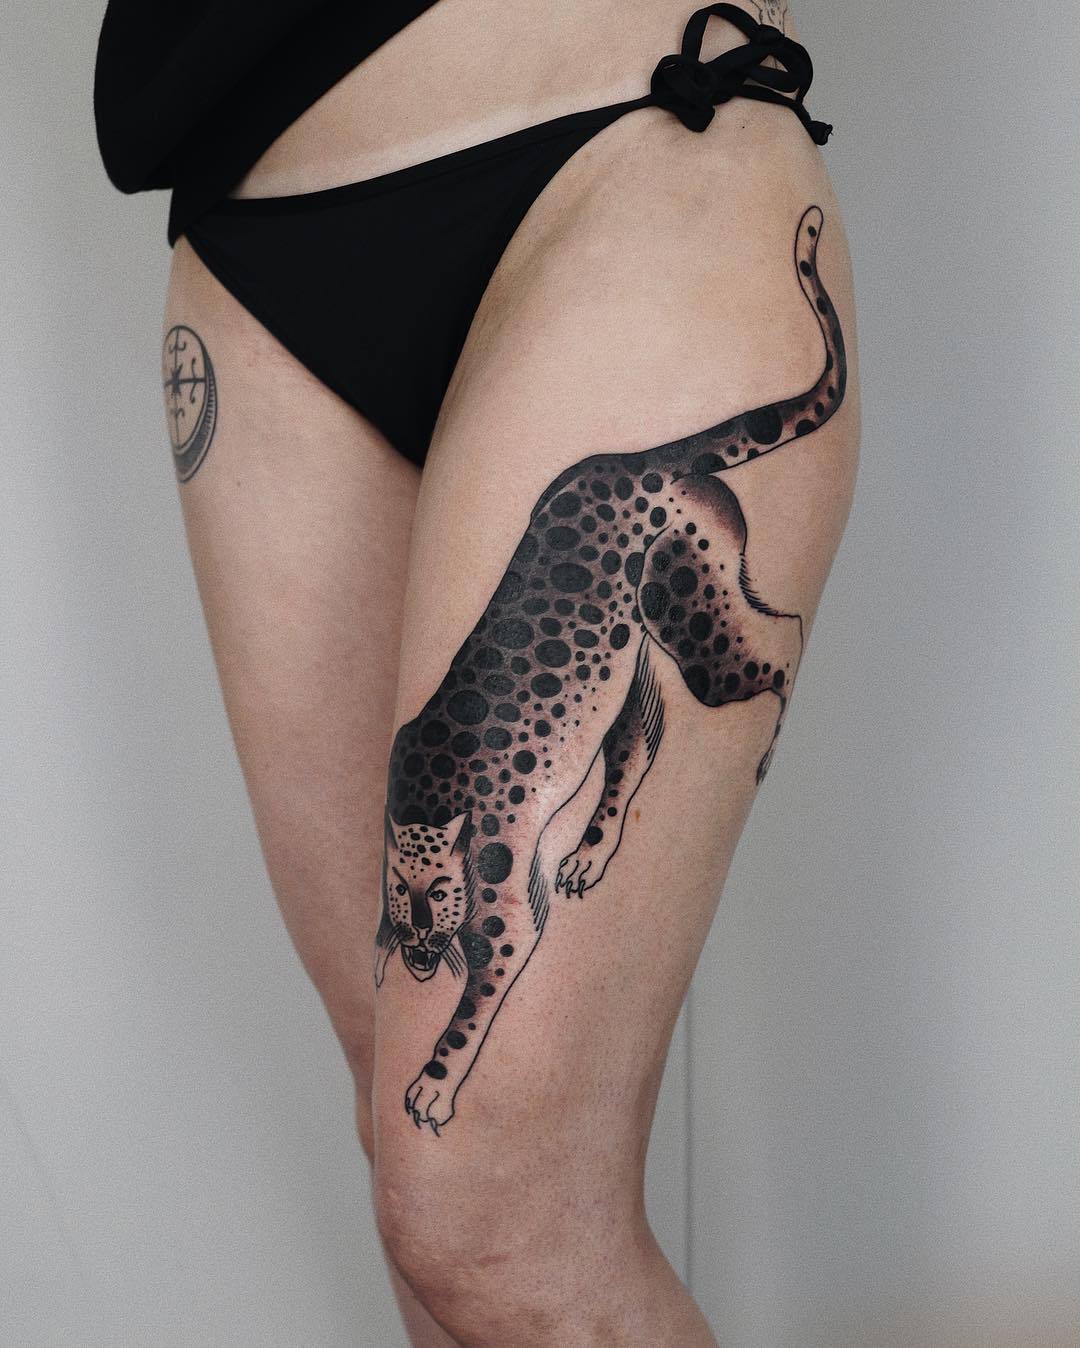 Leopard Tattoo Ideas For Independent And Intelligent People